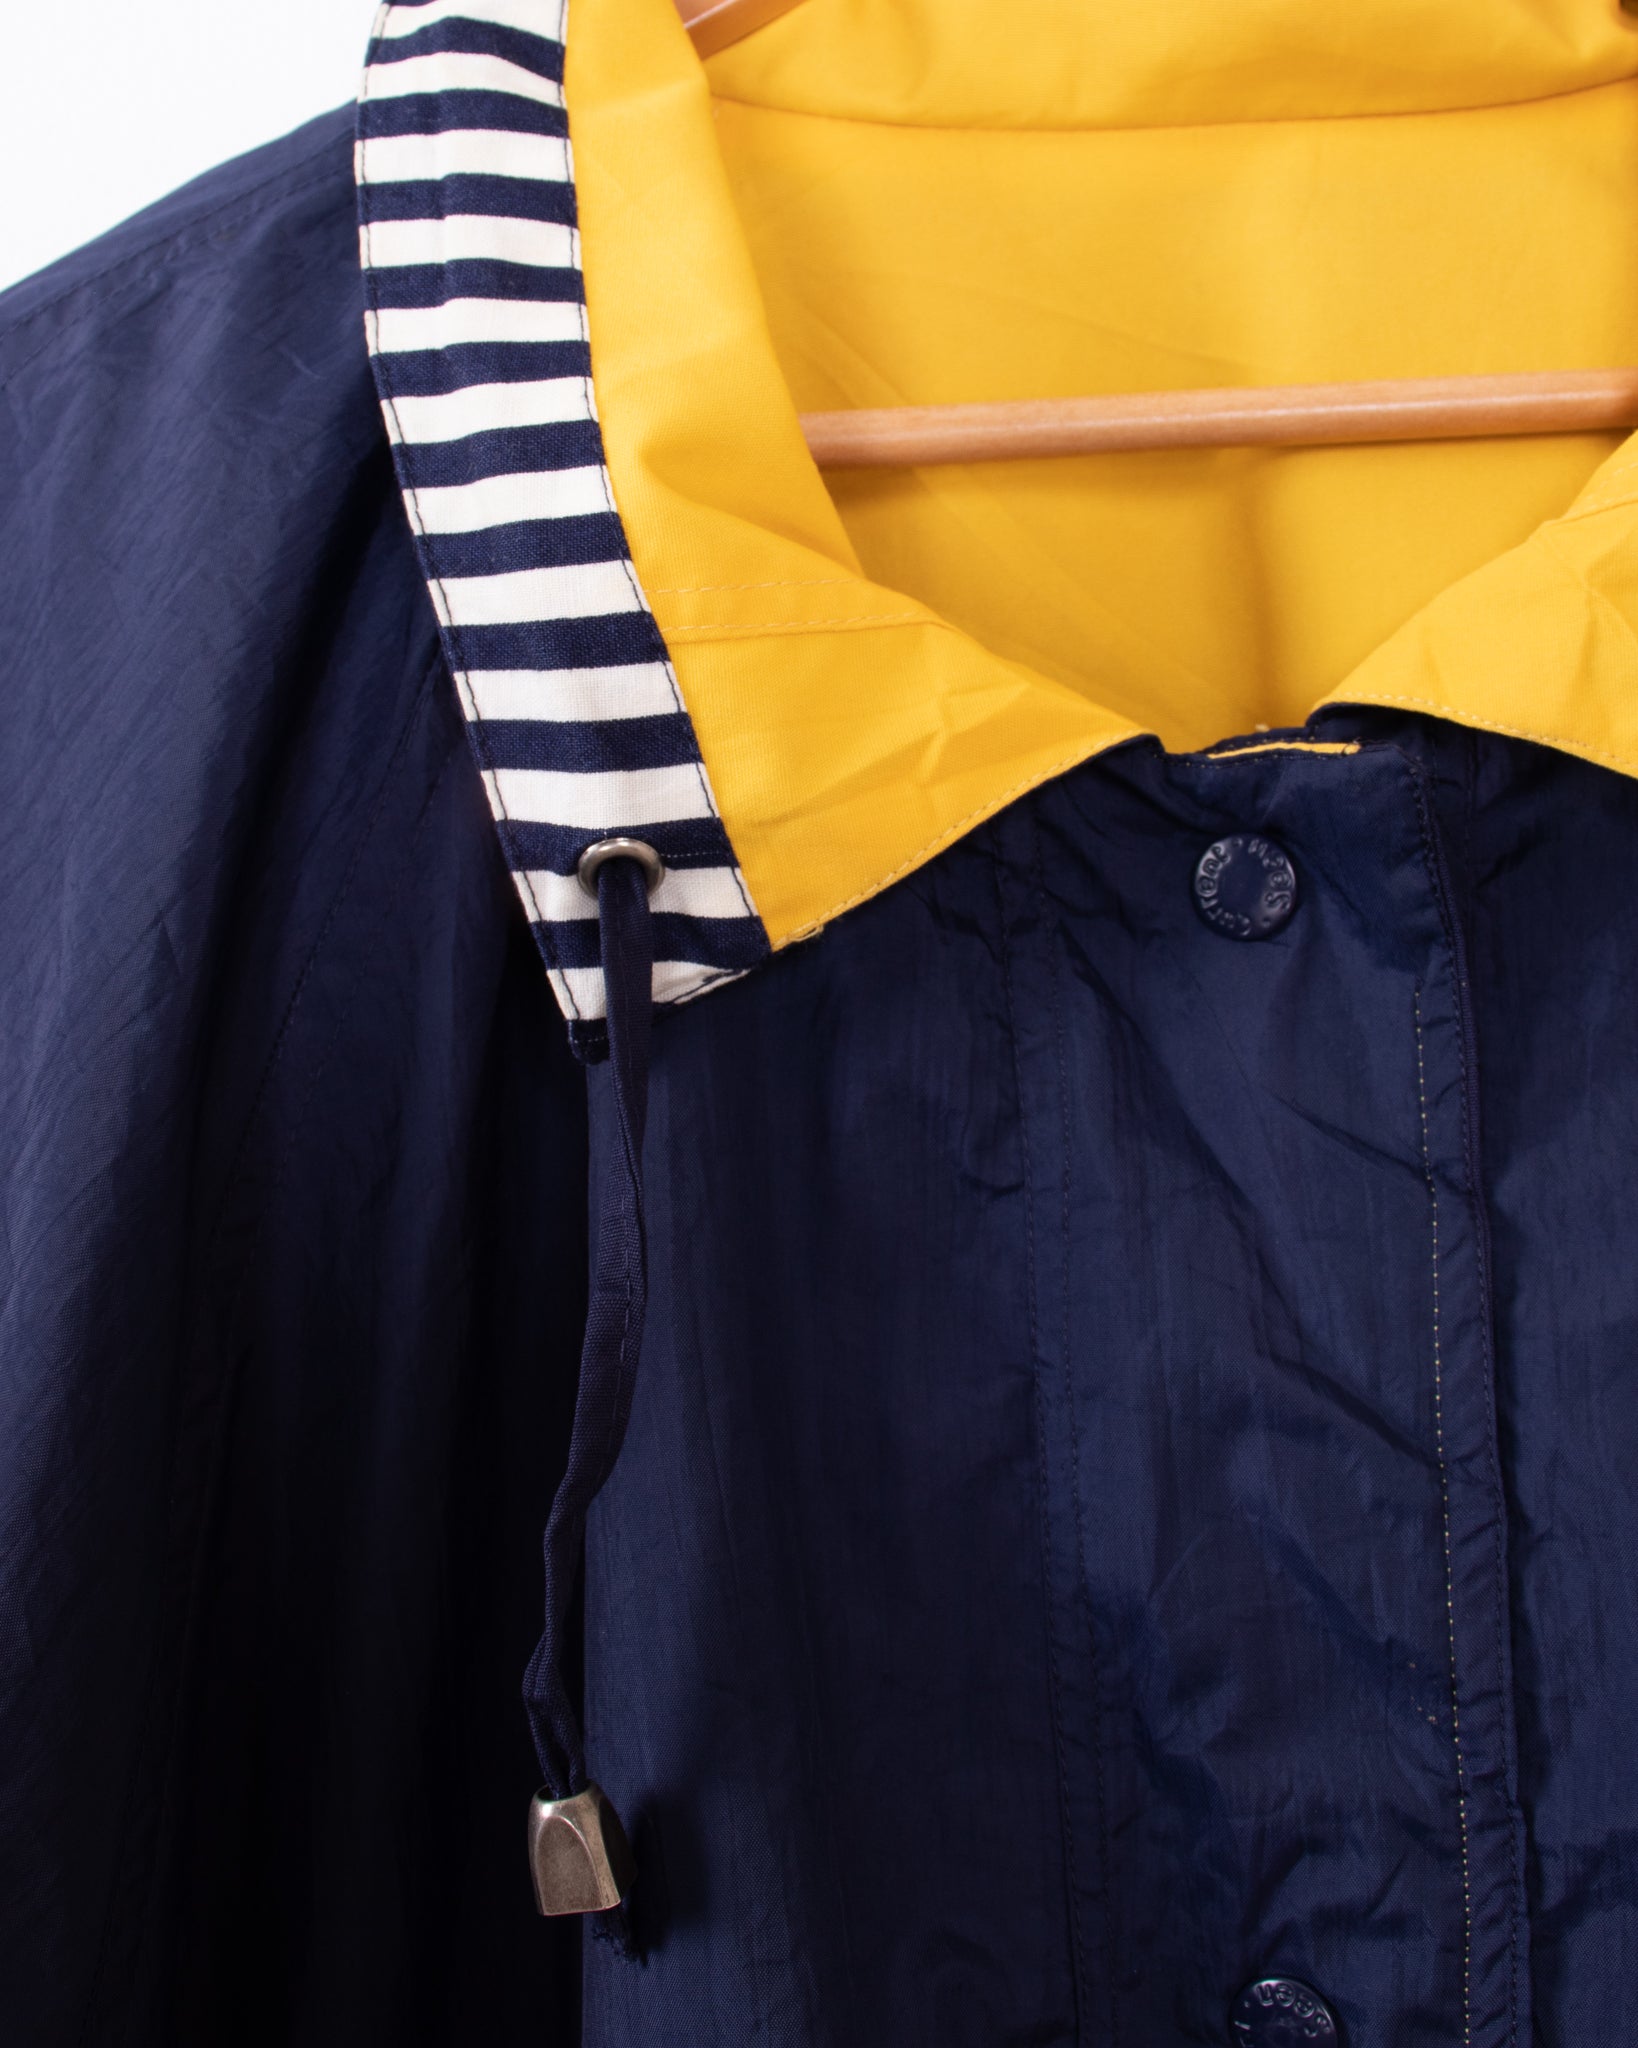 Reversible Navy Blue and Yellow Jacket